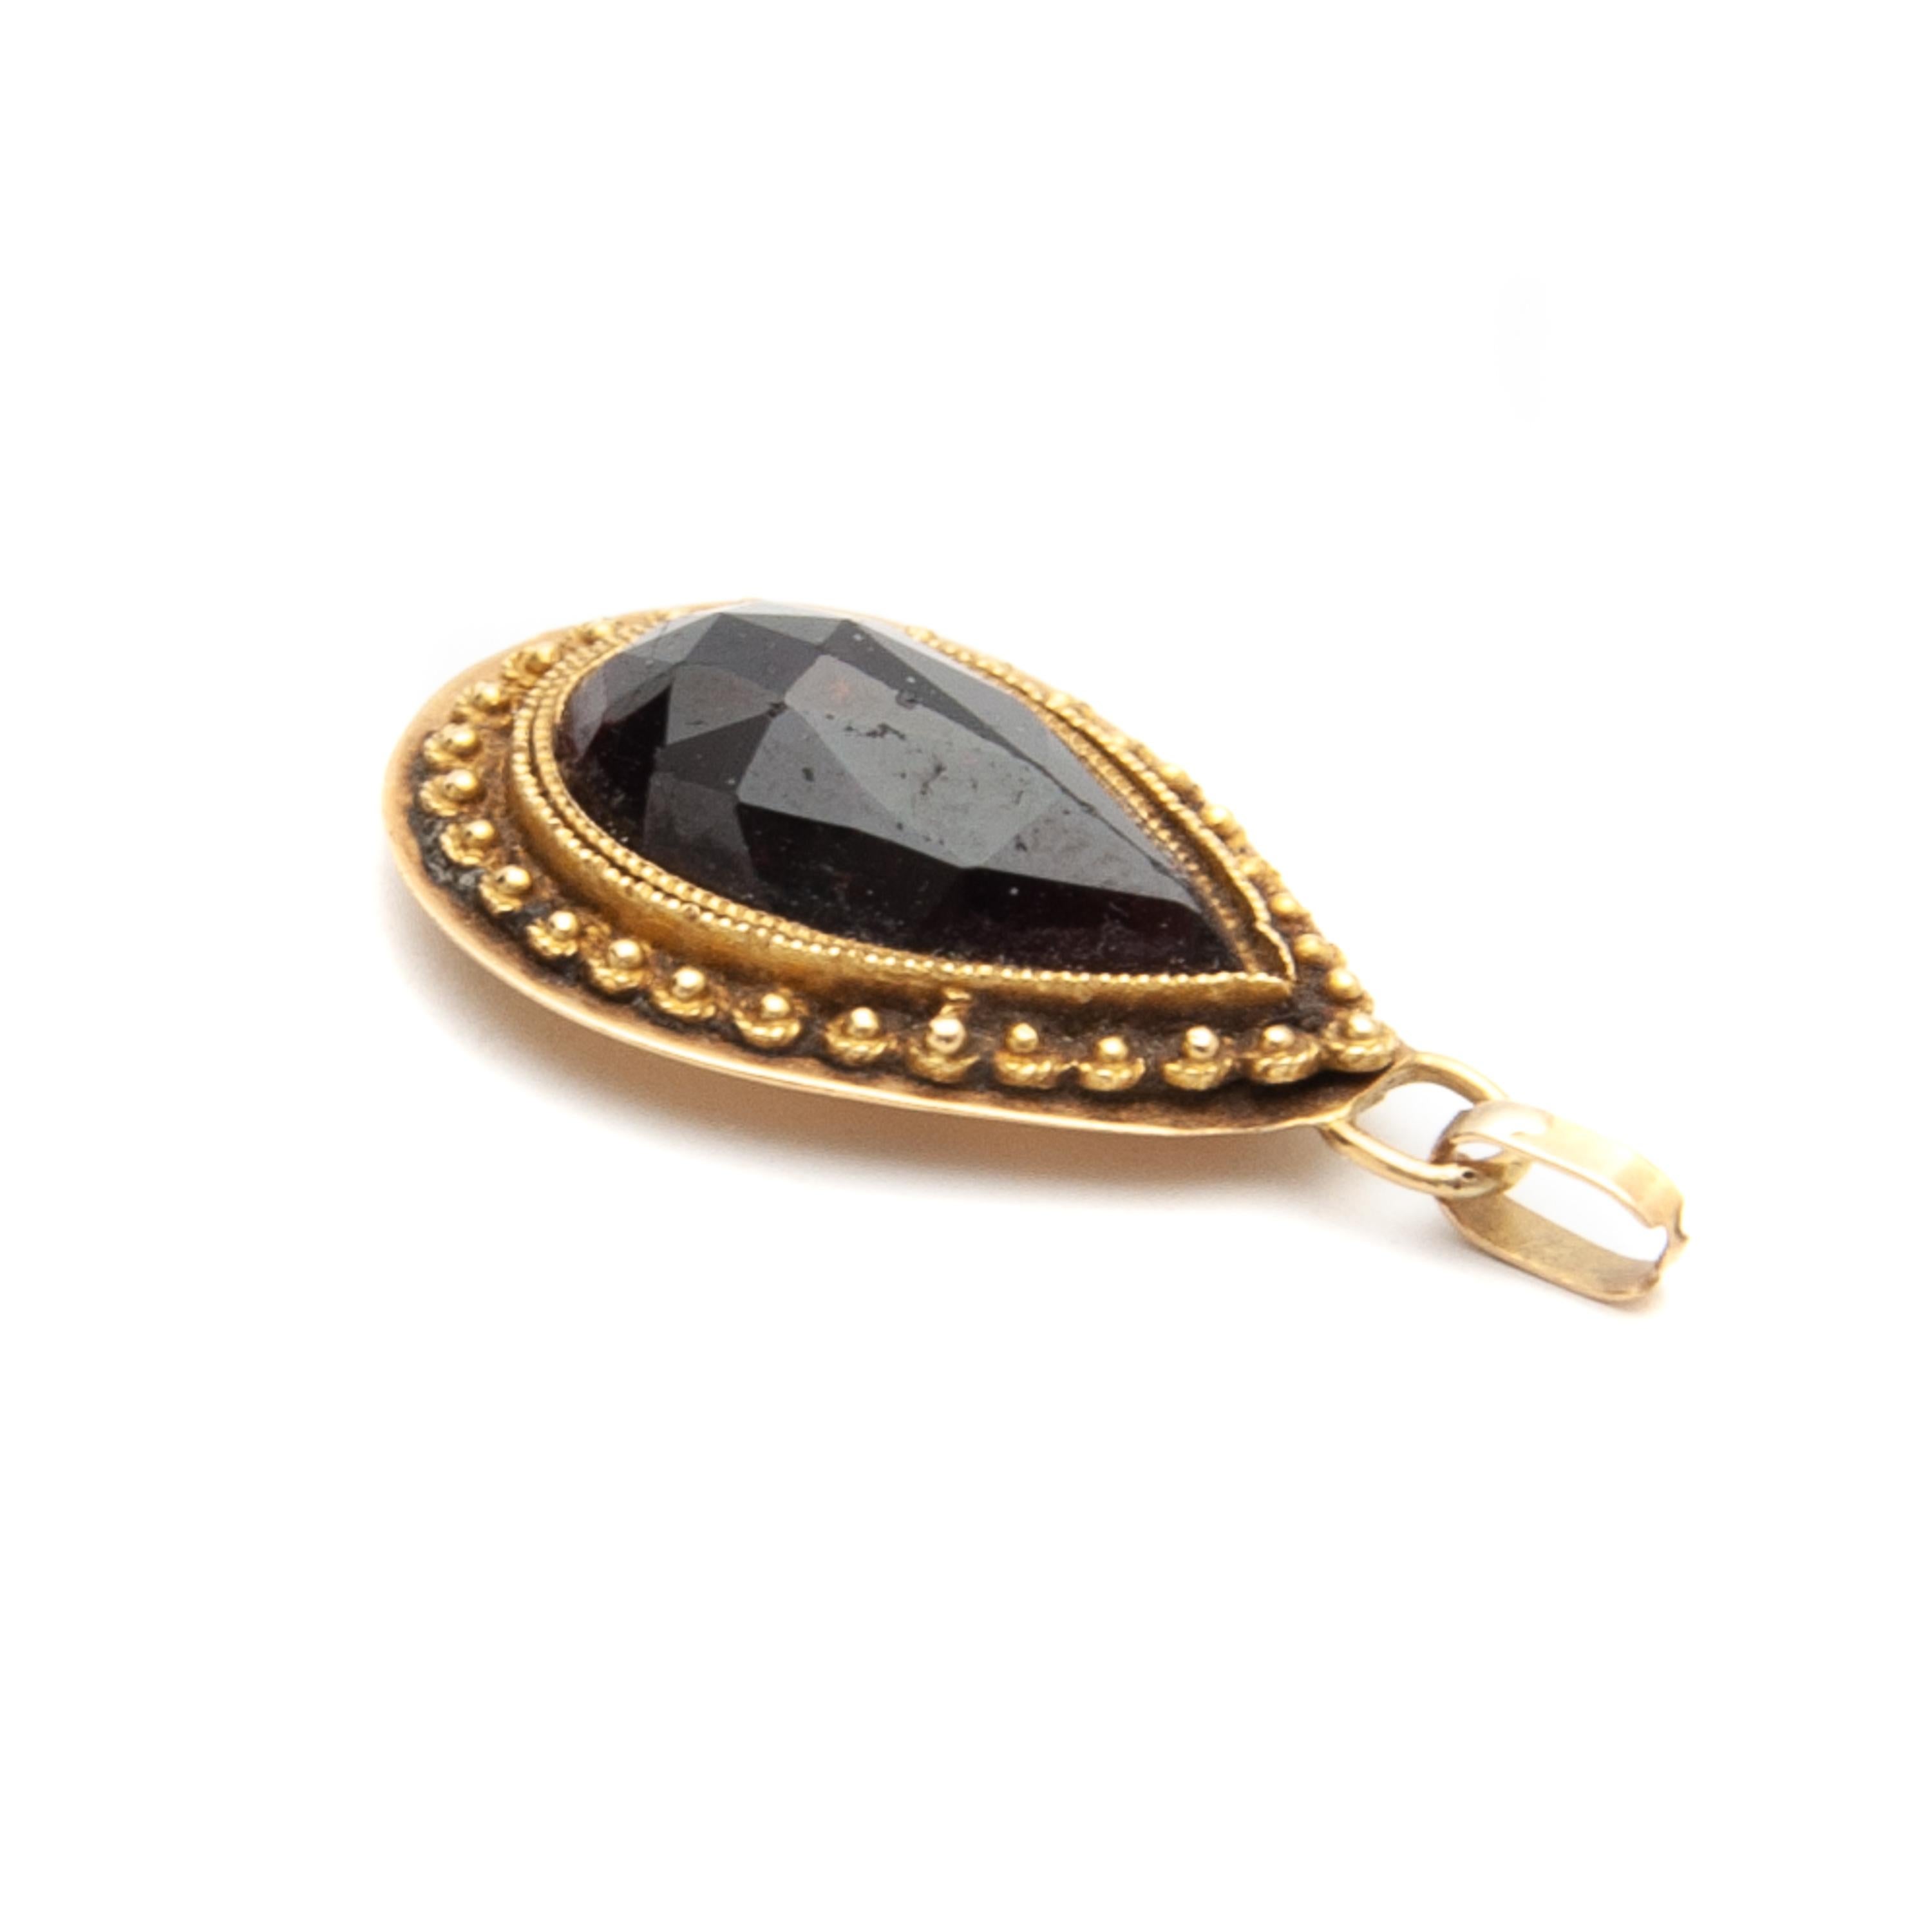 This is an antique drop-shaped garnet pendant created in a 14 karat yellow gold frame. The garnet is surrounded with a double ribbed border and the outer edge has a cannetille design with small knots, the so-called 'spiders'. Cannetille typically